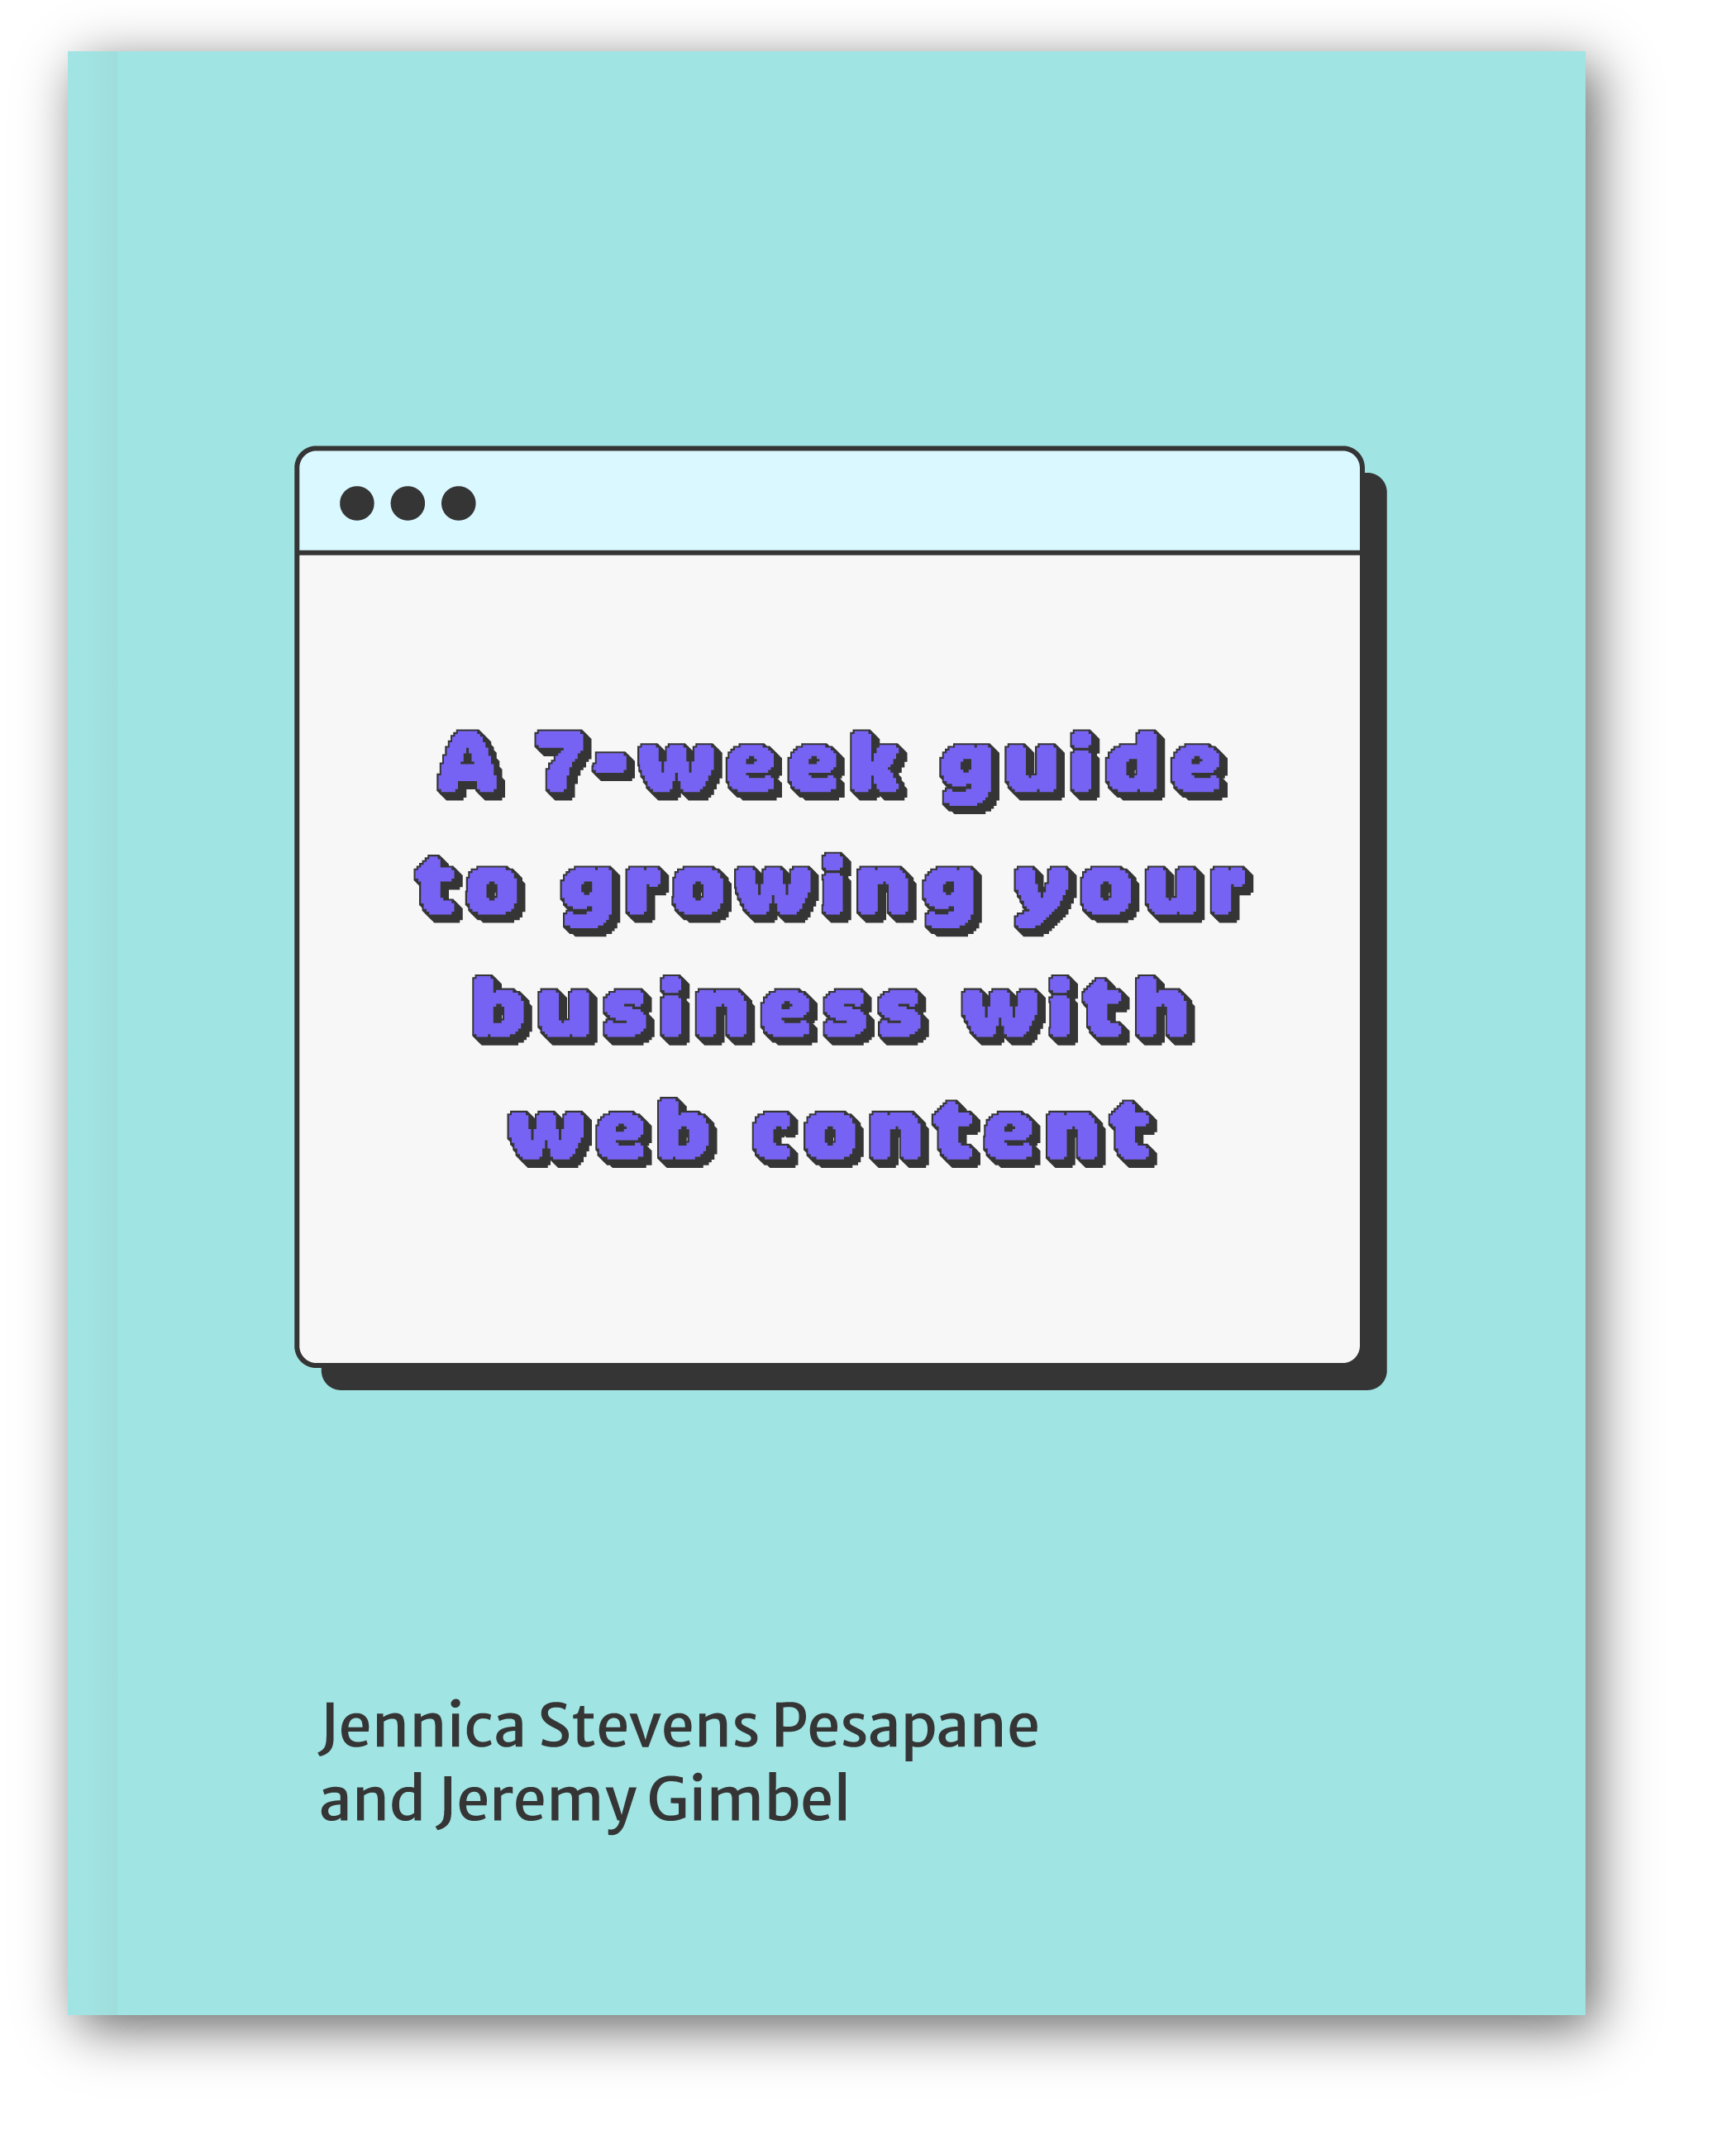 A 7-week guide to growing your business with web content book cover